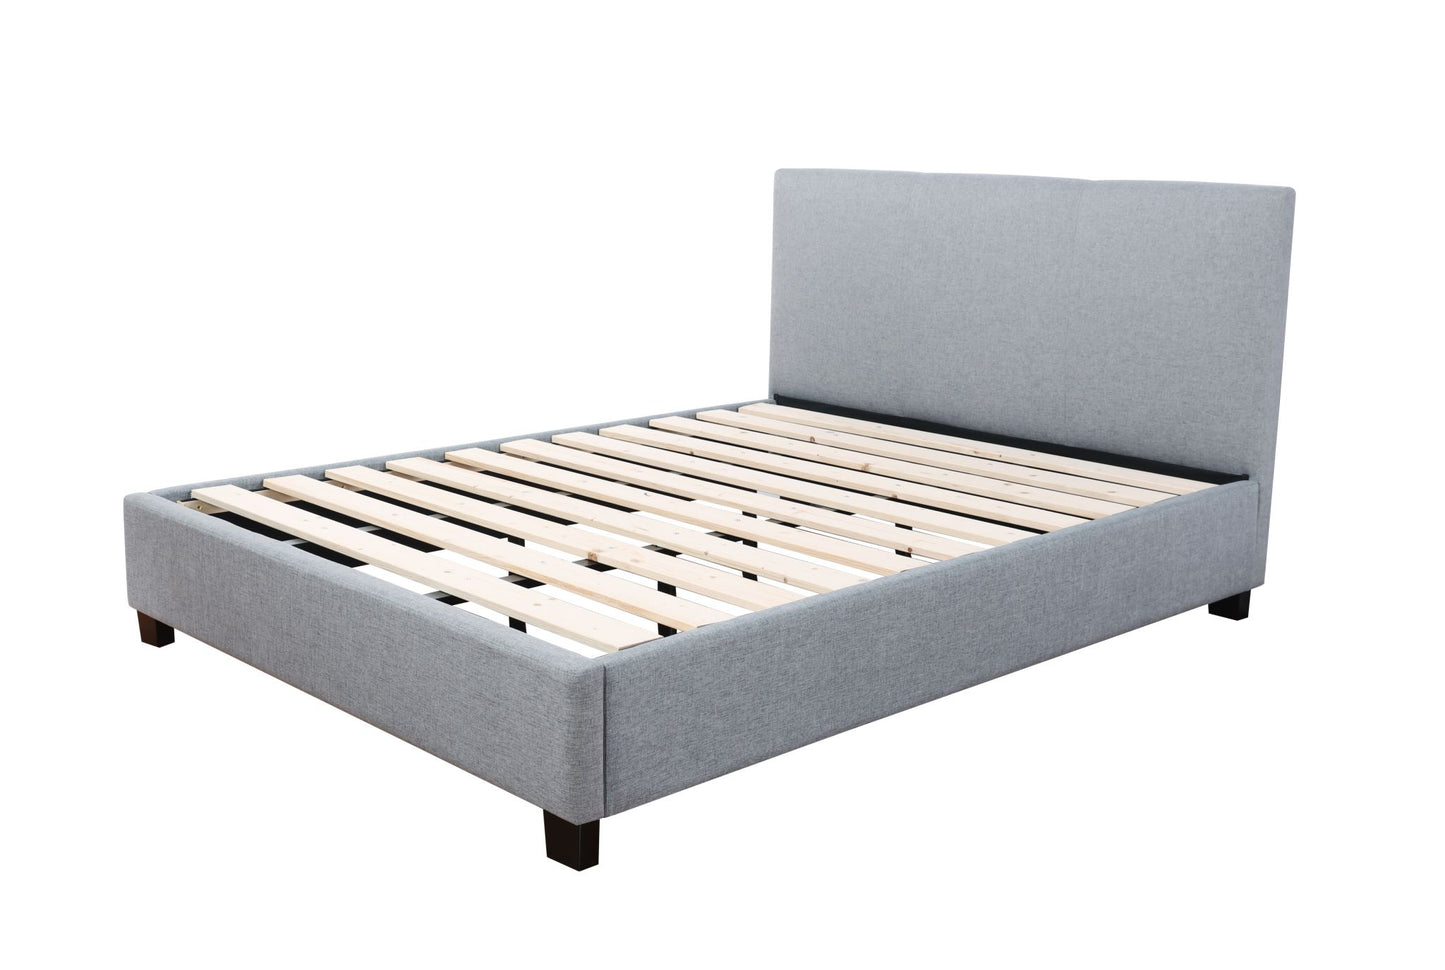 Sleepcenter Queen 5 Zone Pocket Spring Mattress & Bed frame with head board Combo